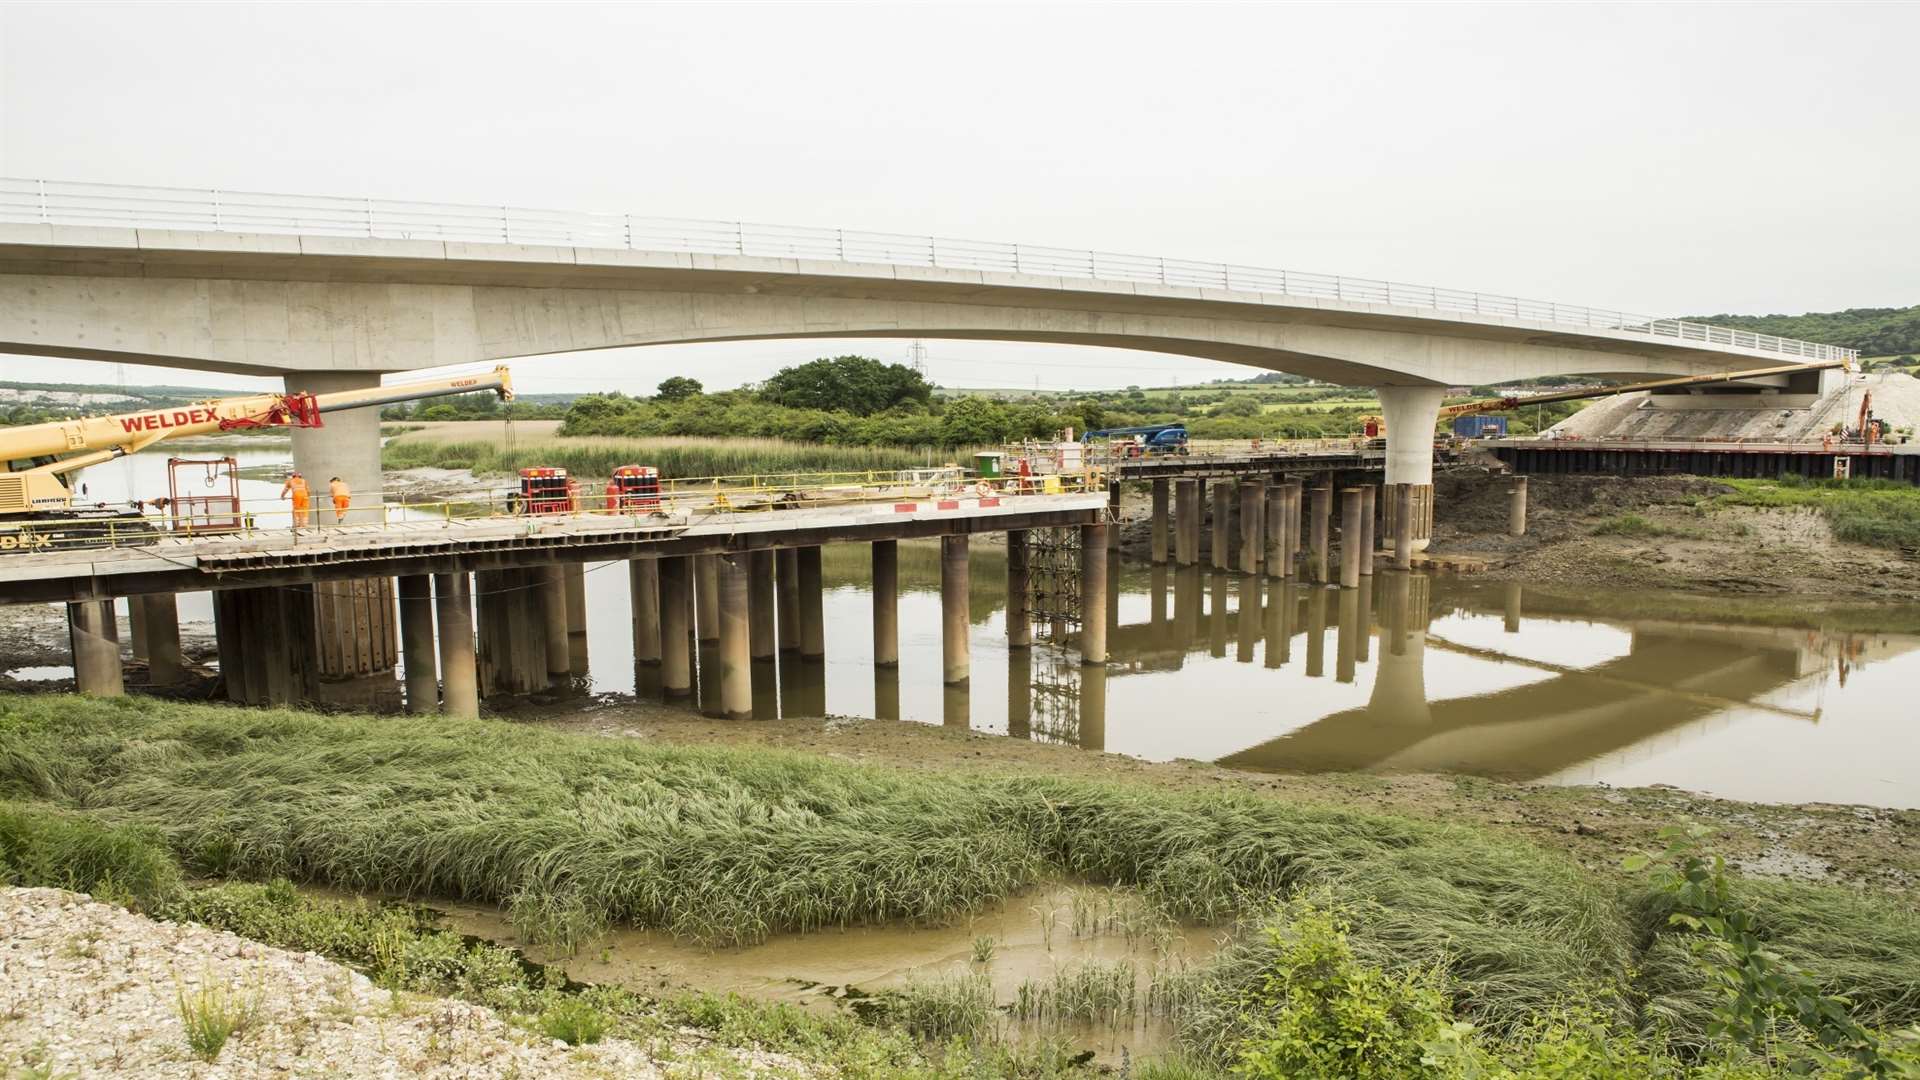 The new bridge over the River Medway opens today